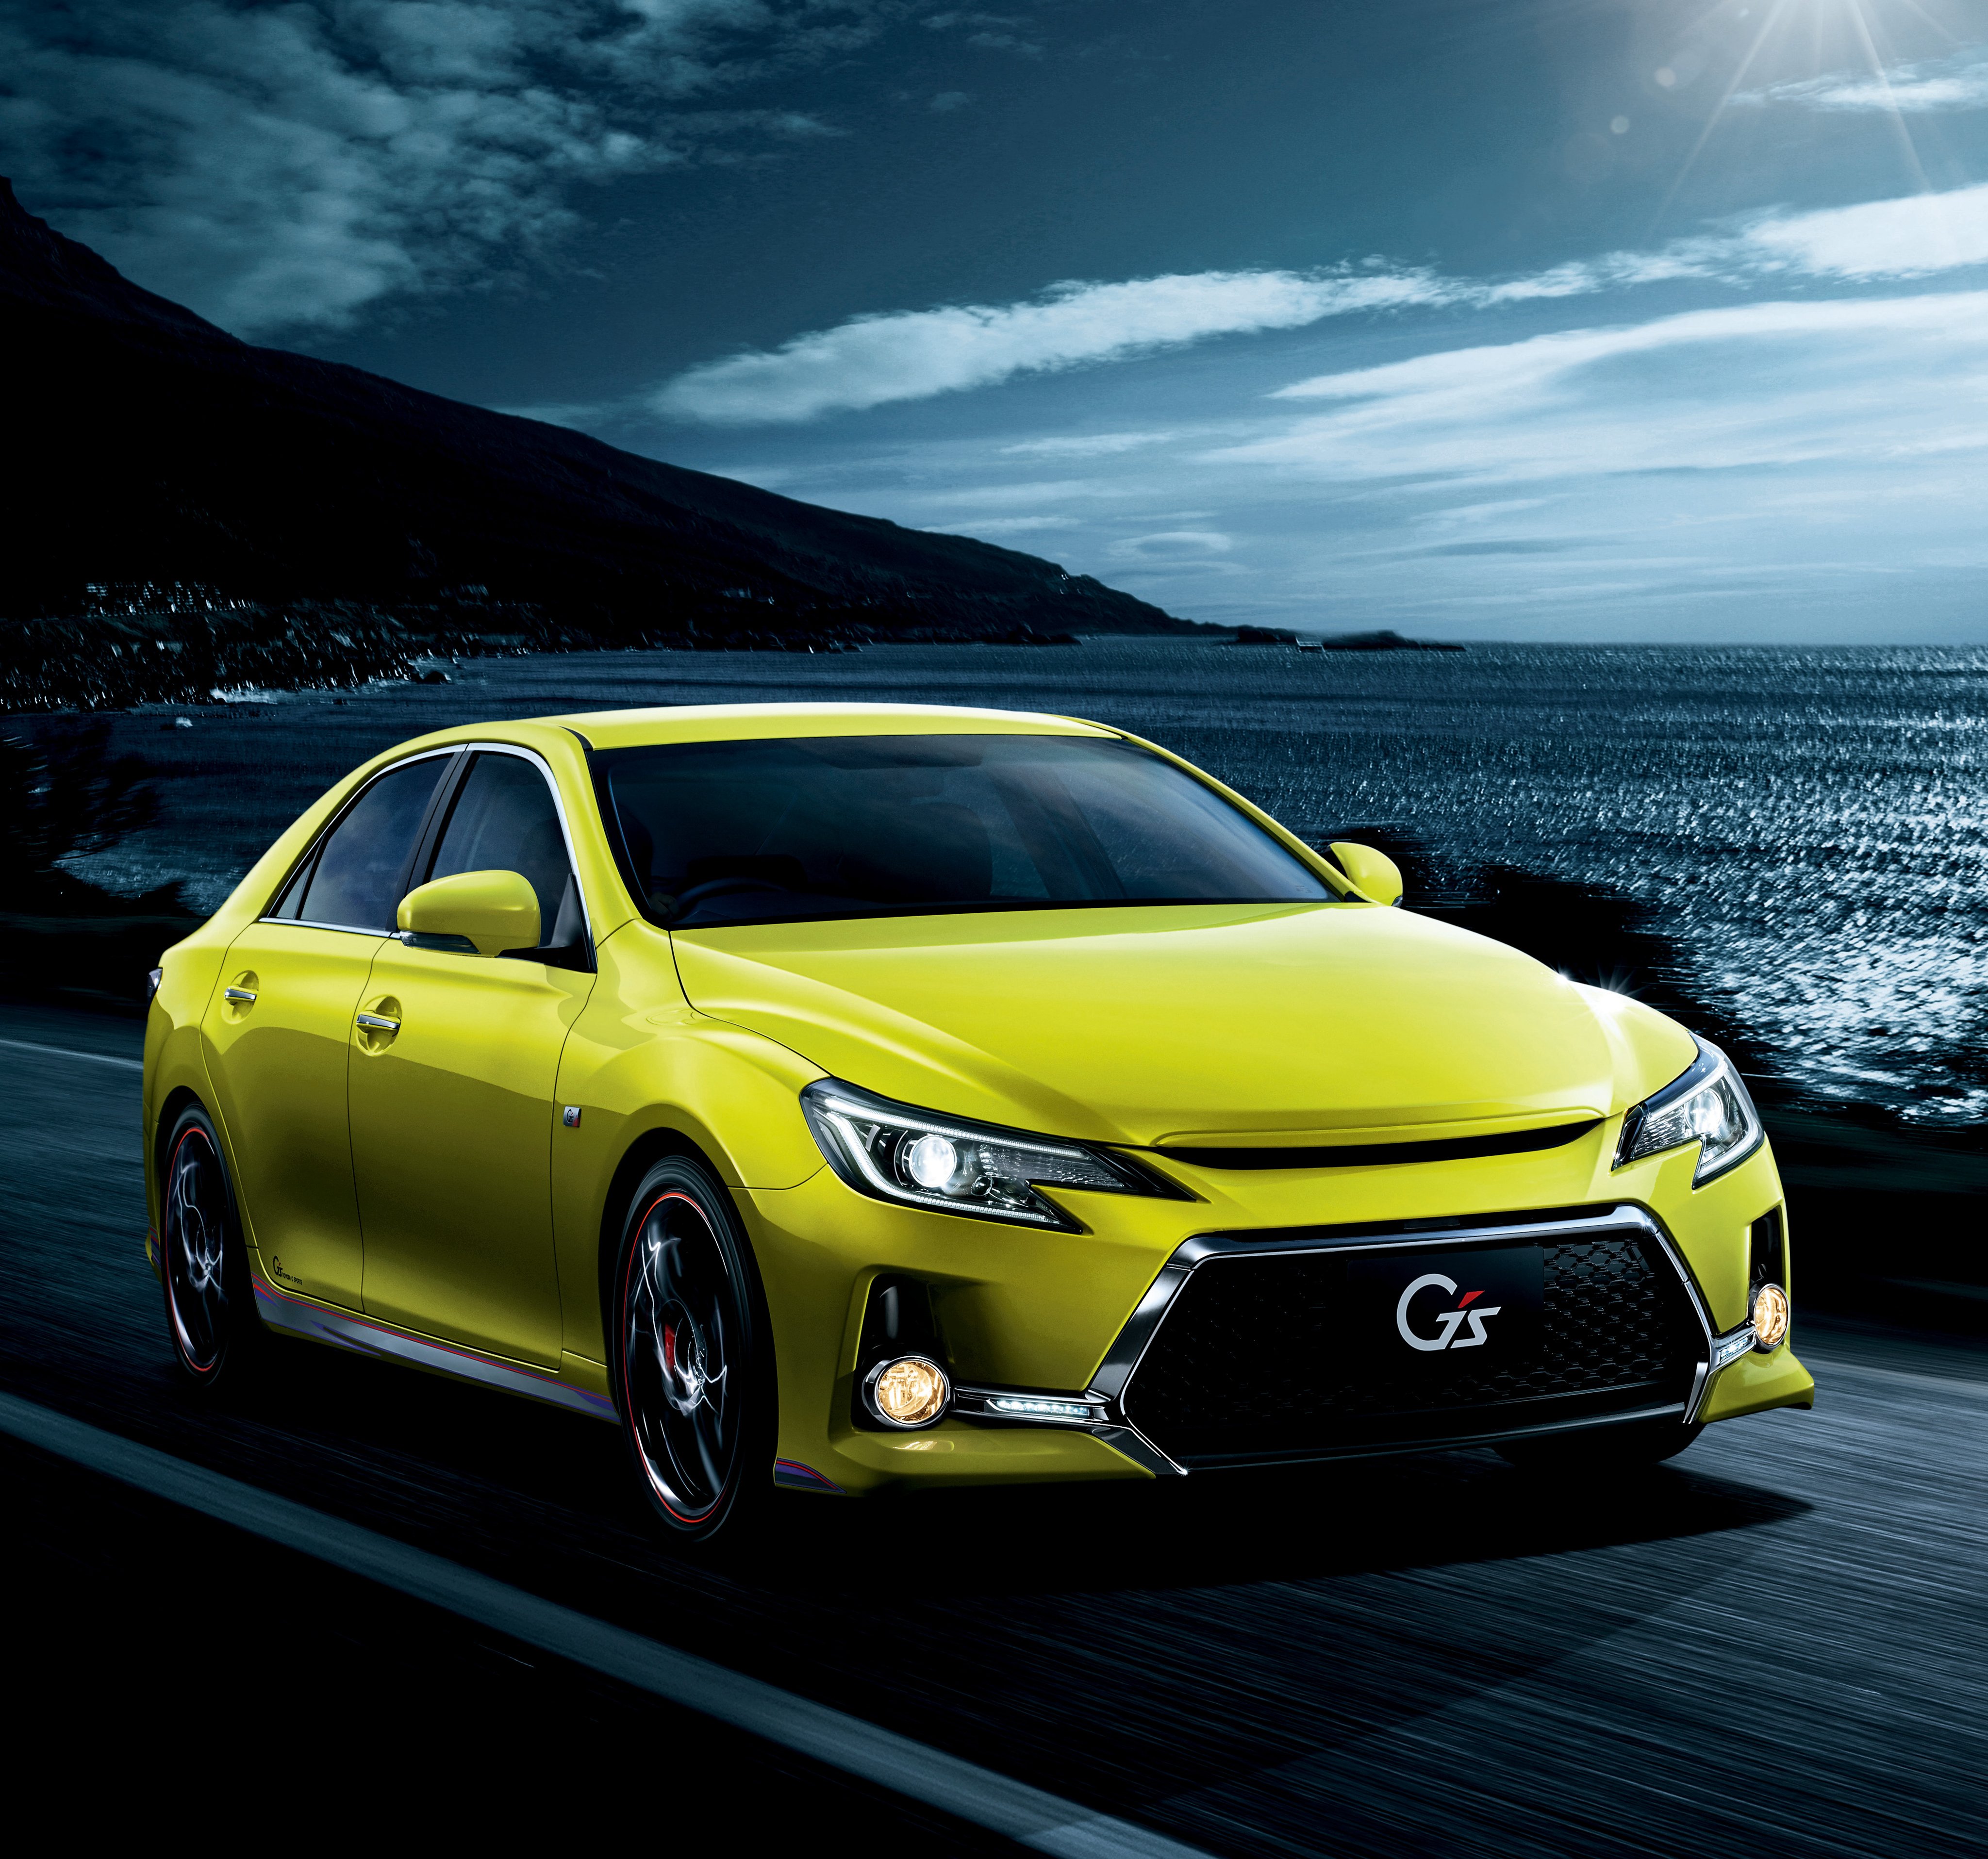 Toyota Mark X Wallpapers